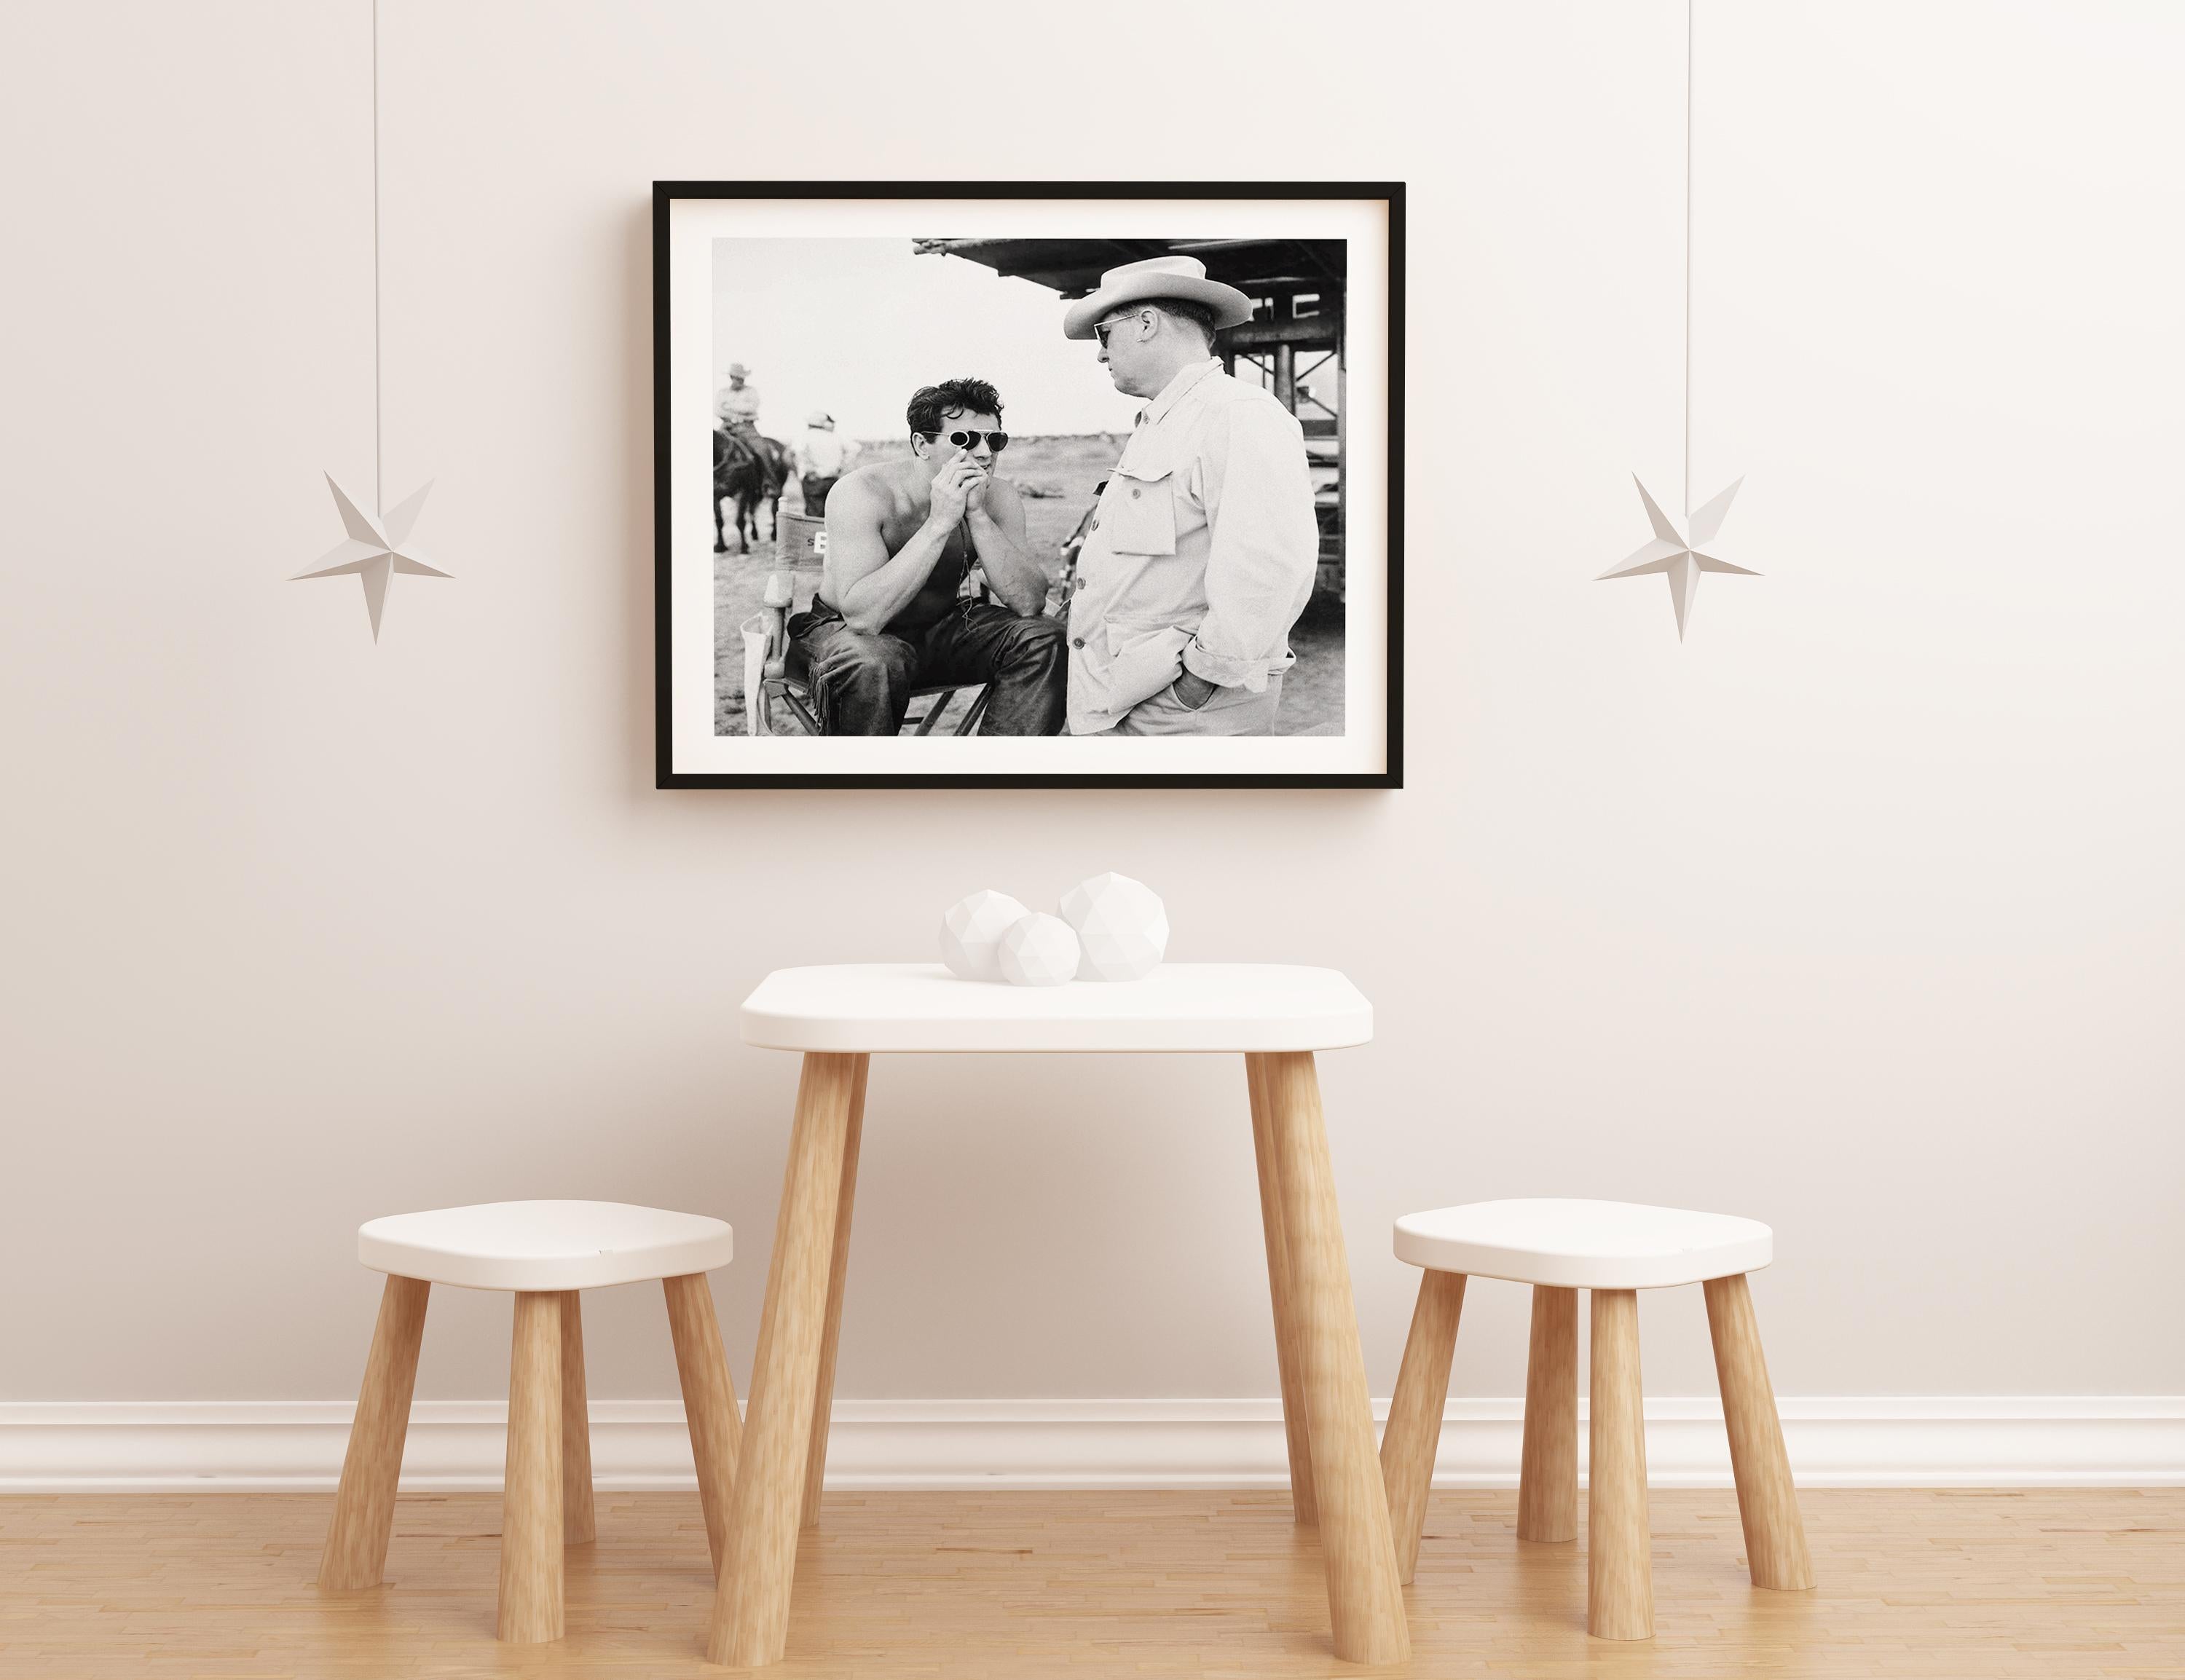 This black and white portrait by Frank Worth features a candid shot of Rock Hudson and George Stevens conversing on the set of 